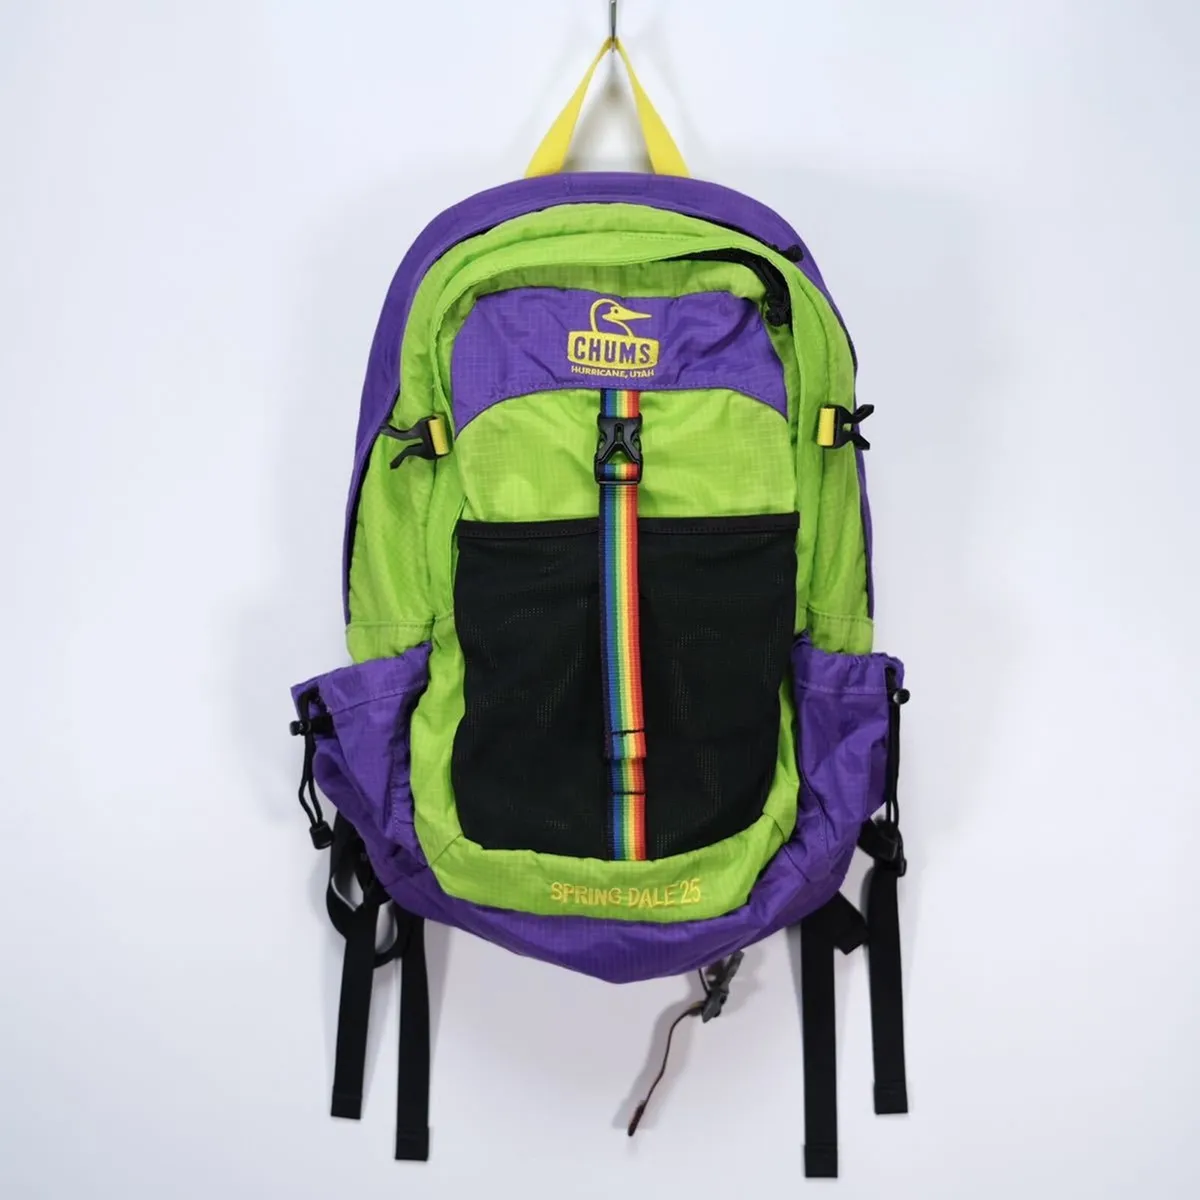 CHUMS Spring Dale 25 Backpack From JAPAN